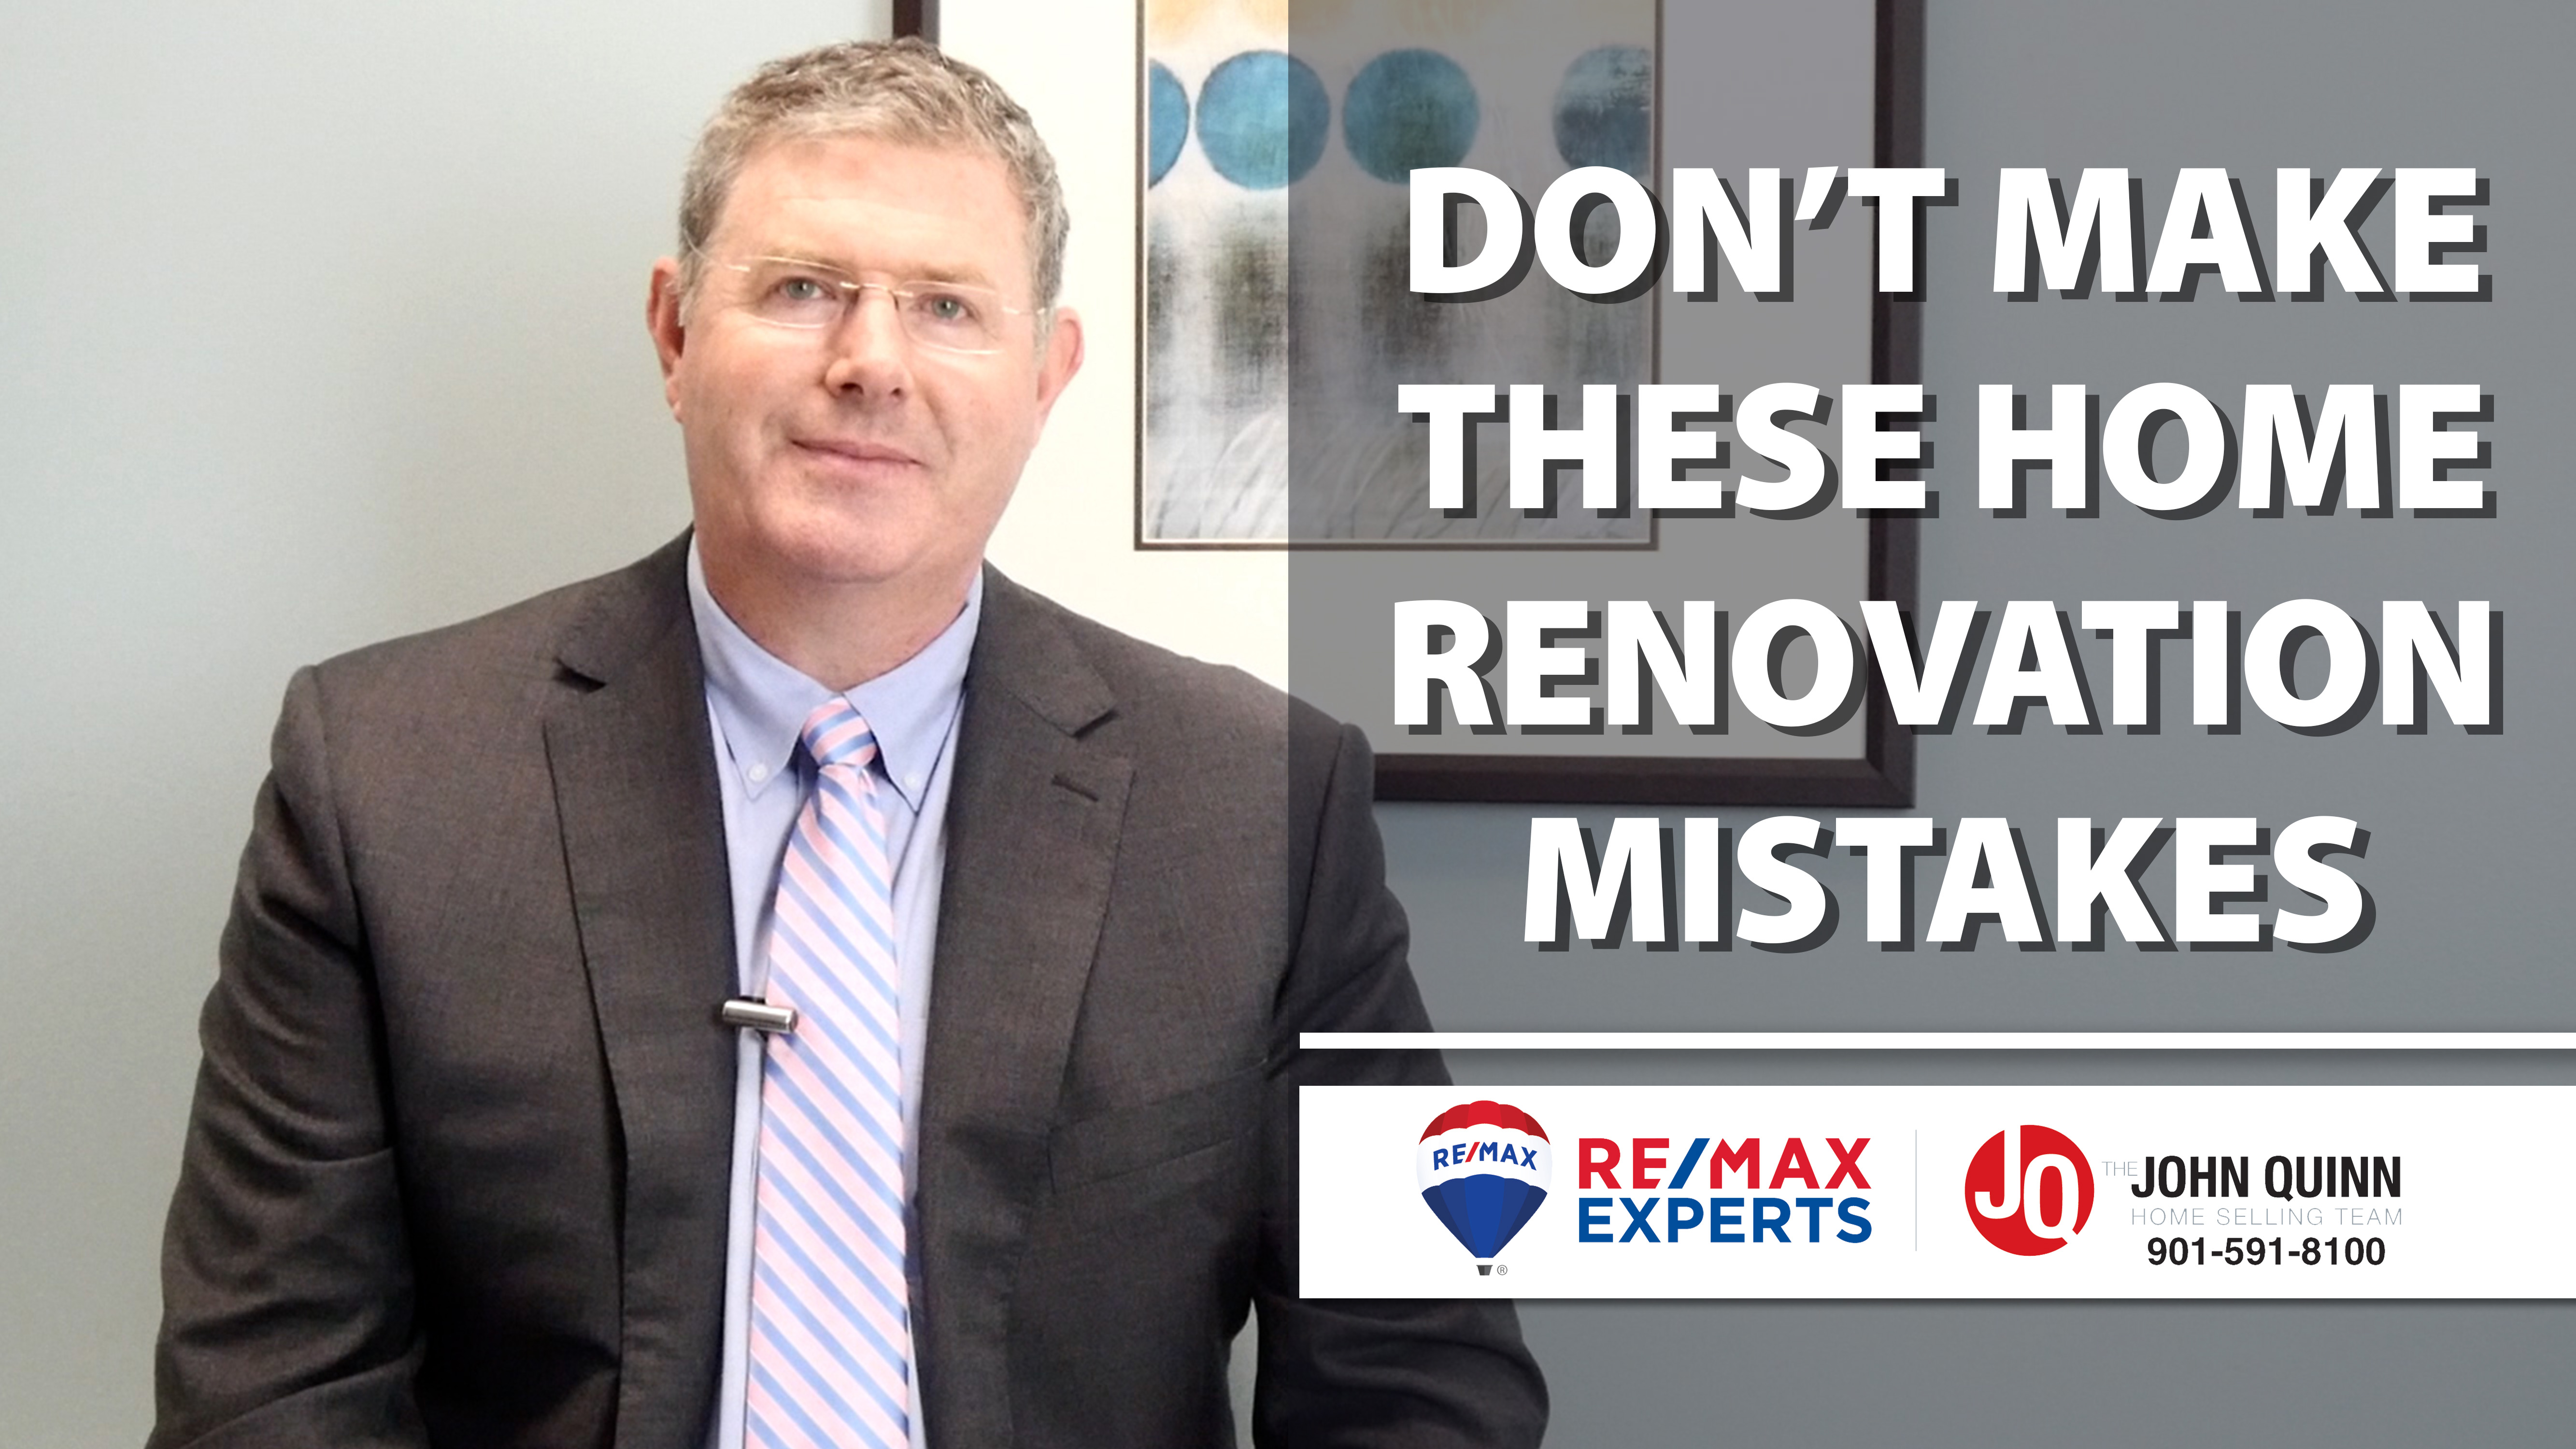 Which Home Renovation Mistakes Must You Avoid?